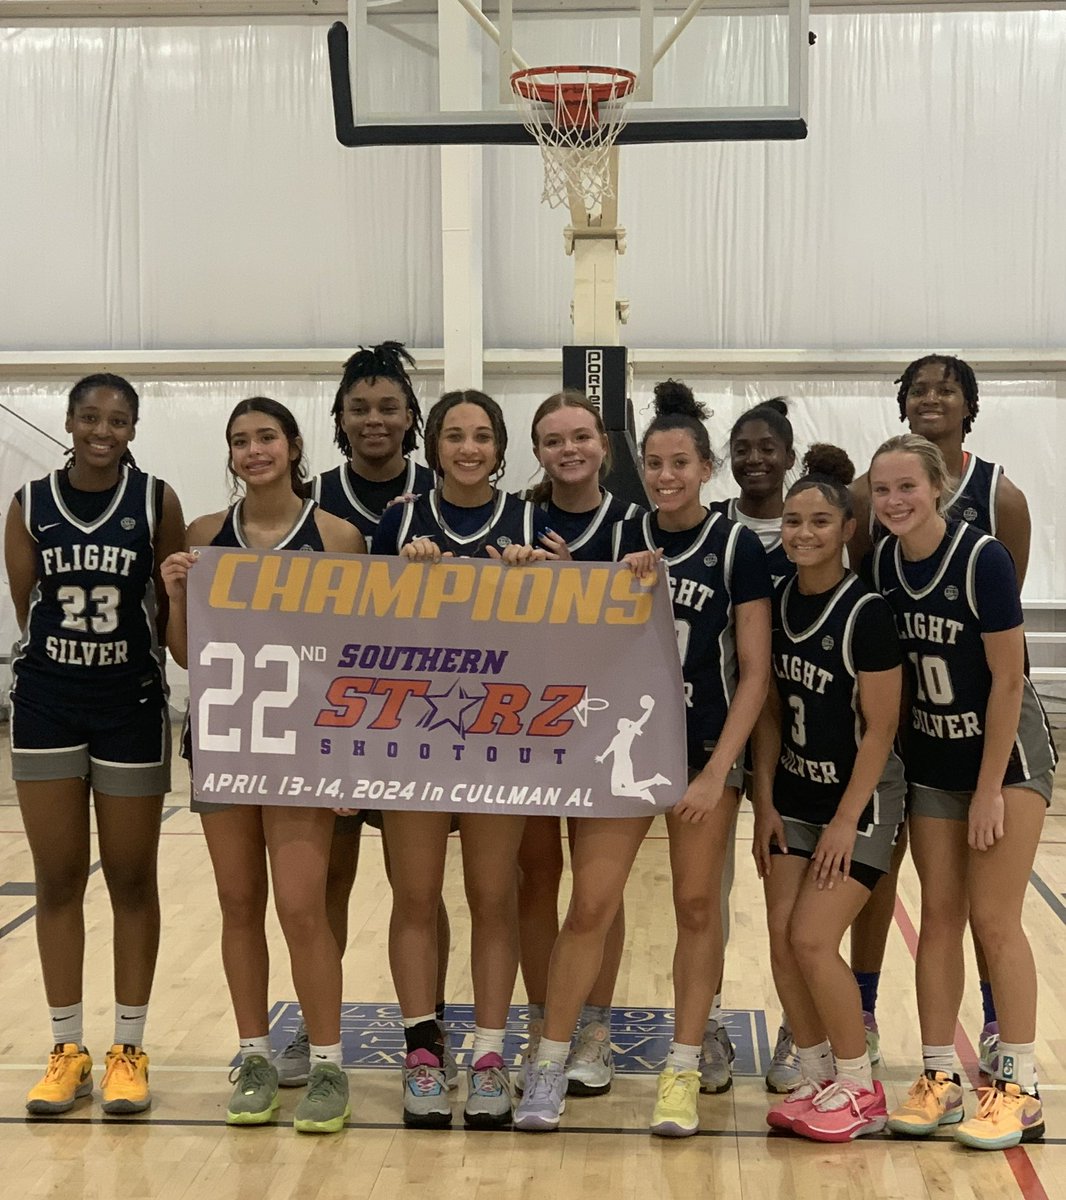 Me & my team went undefeated at the Southern Starz Shootout!! Love my girls & ready to put in work next weekend at BOO Williams!! @aayers22 @WeWorkHoops @TNFlightEYBL